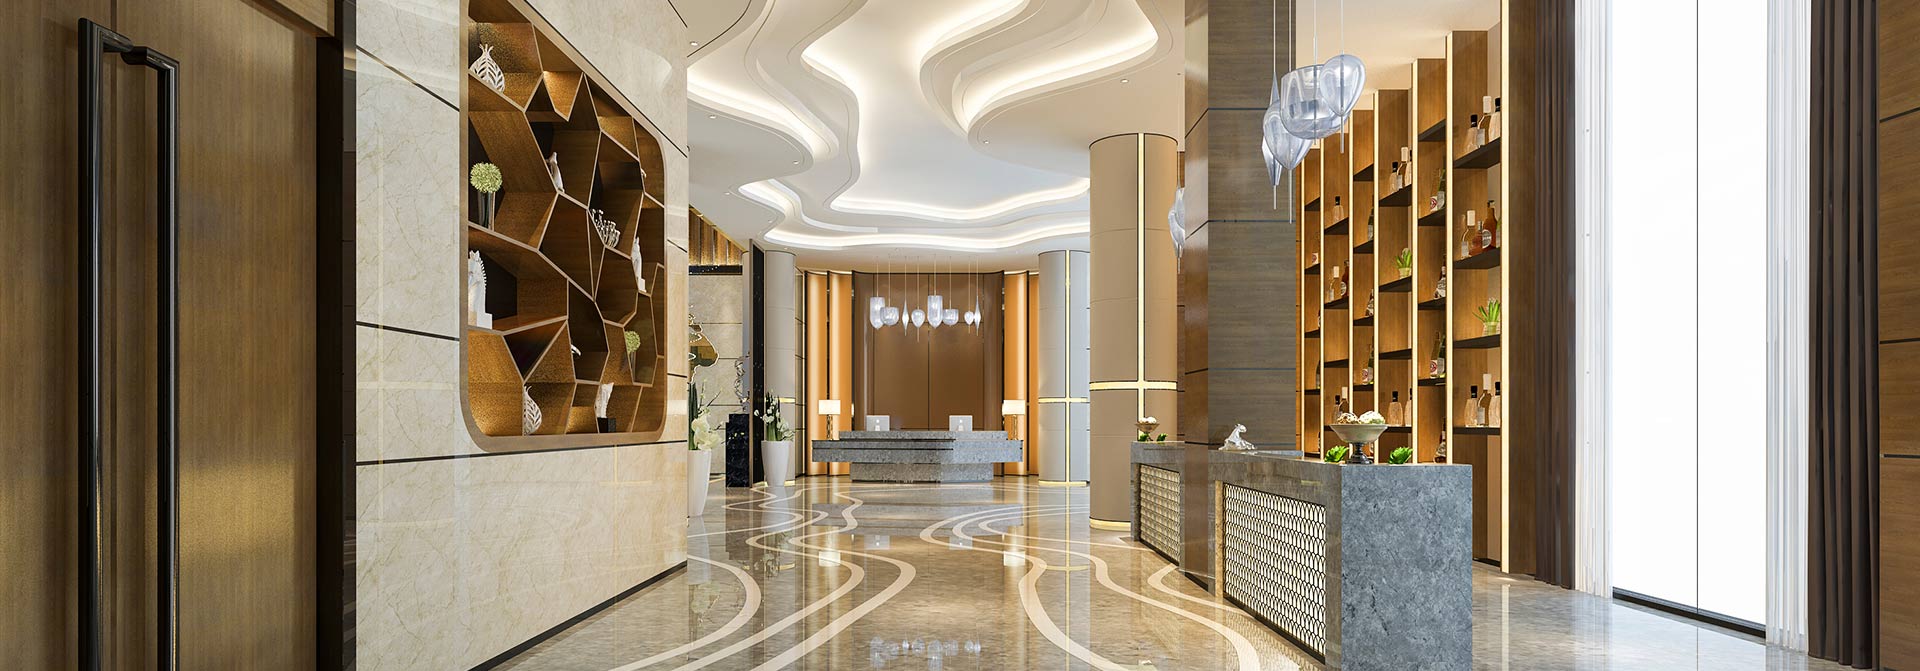 Creative lobby design ideas in gold and white hues with plants from both sides